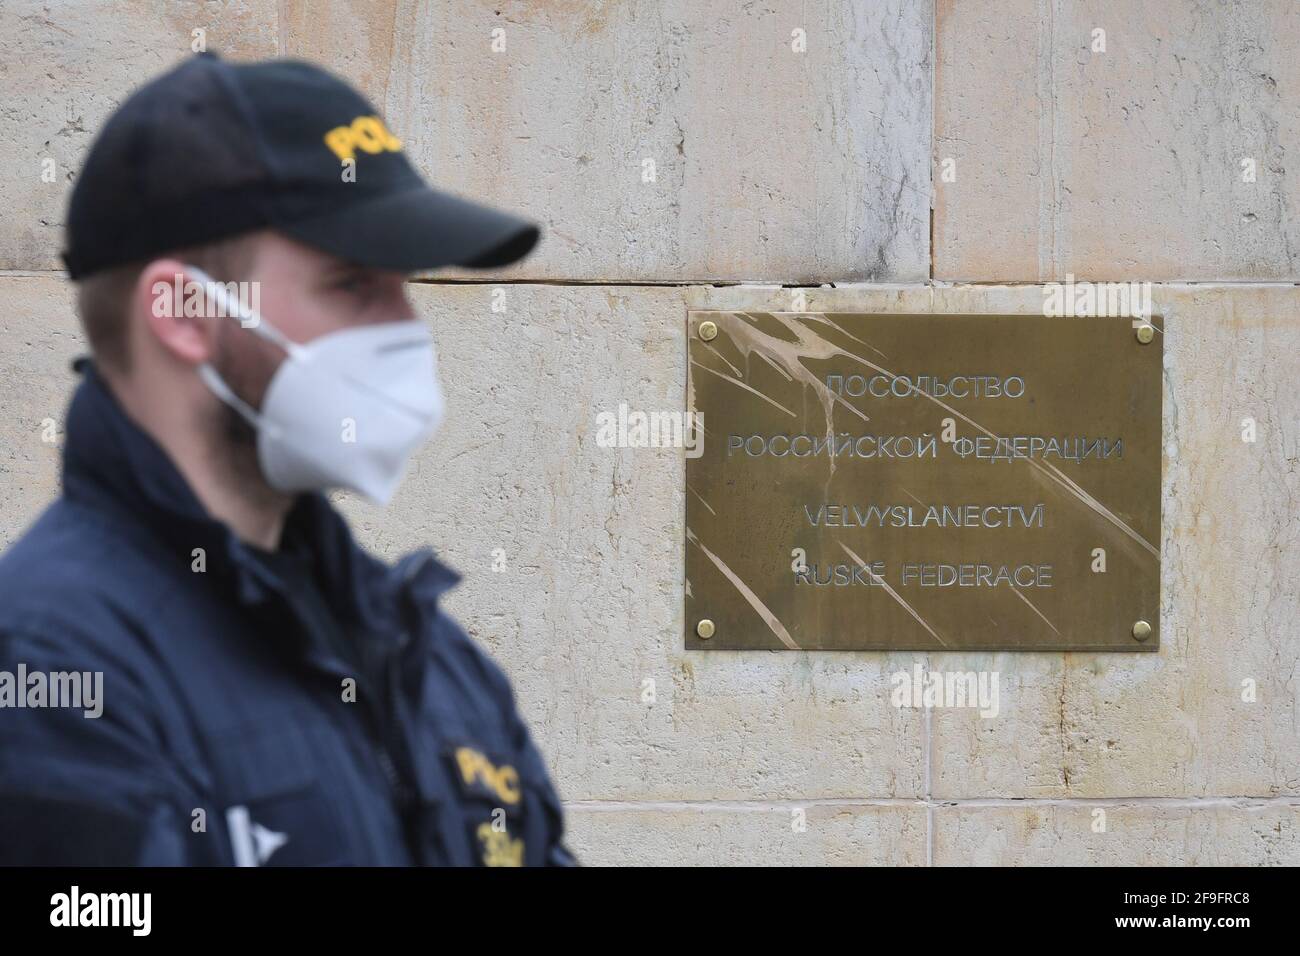 Czech police officer guards an area in front of the building of the Embassy of the Russian Federation in Prague, Czech Republic, on April 18, 2021. Russian secret service GRU members were involved in the explosion of the Czech ammunition store compound in Vrbetice, south Moravia, in 2014, Czech security forces have found out. In reaction, Czechia is expelling 18 members of the Russian embassy staff who were identified as members of Russian secret services. They have to leave Czechia in 48 hours, PM Andrej Babis and Deputy PM Jan Hamacek said on April 17. The night after the announcement of thi Stock Photo